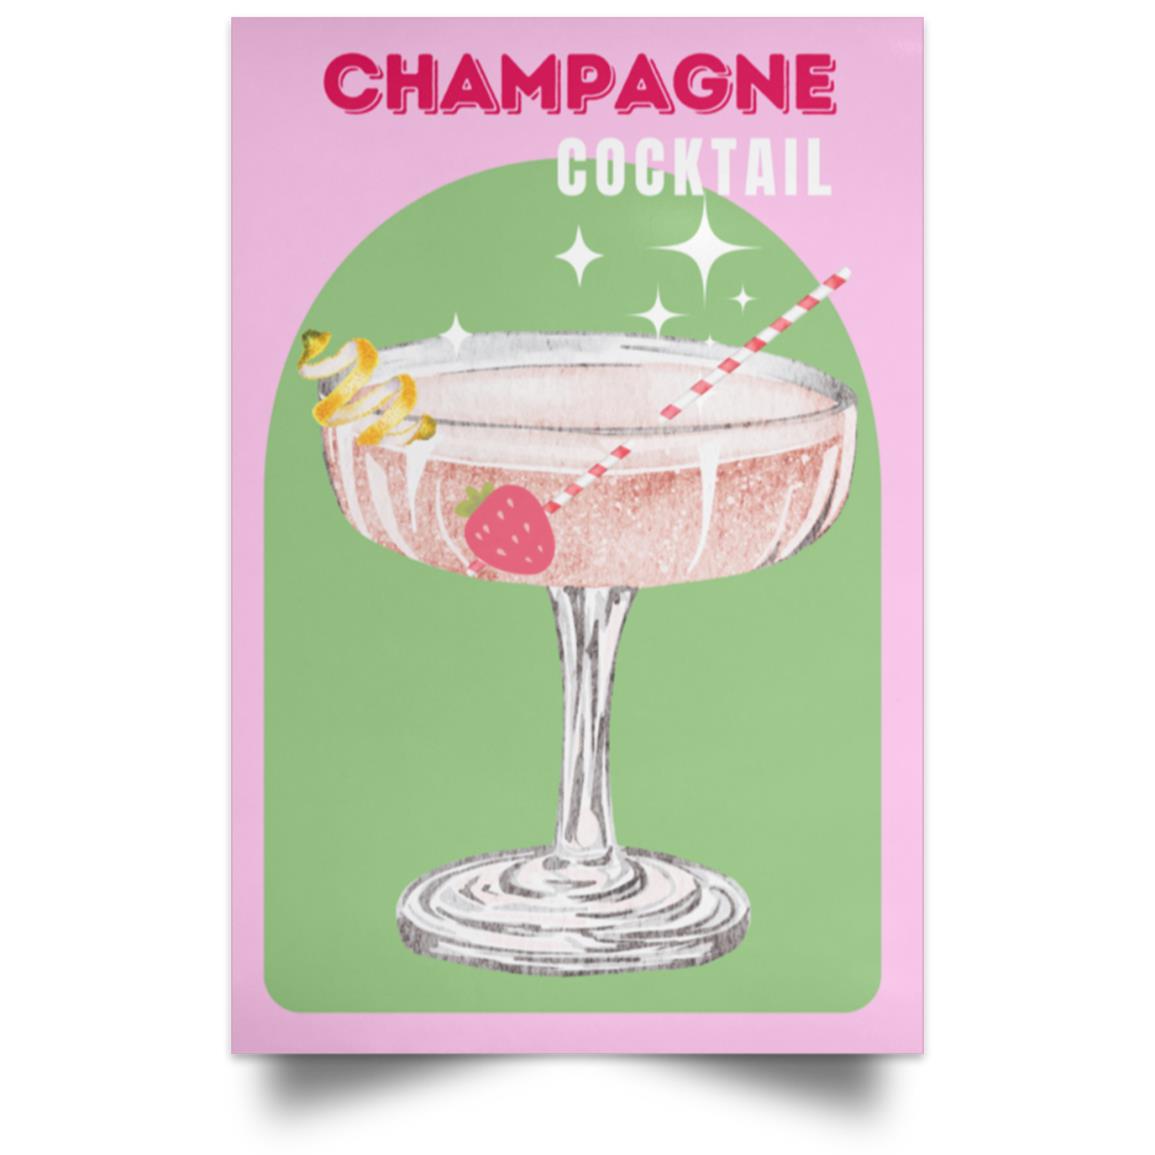 Get trendy with Champagne (2) Champaign Poster - Housewares available at Good Gift Company. Grab yours for $6.75 today!